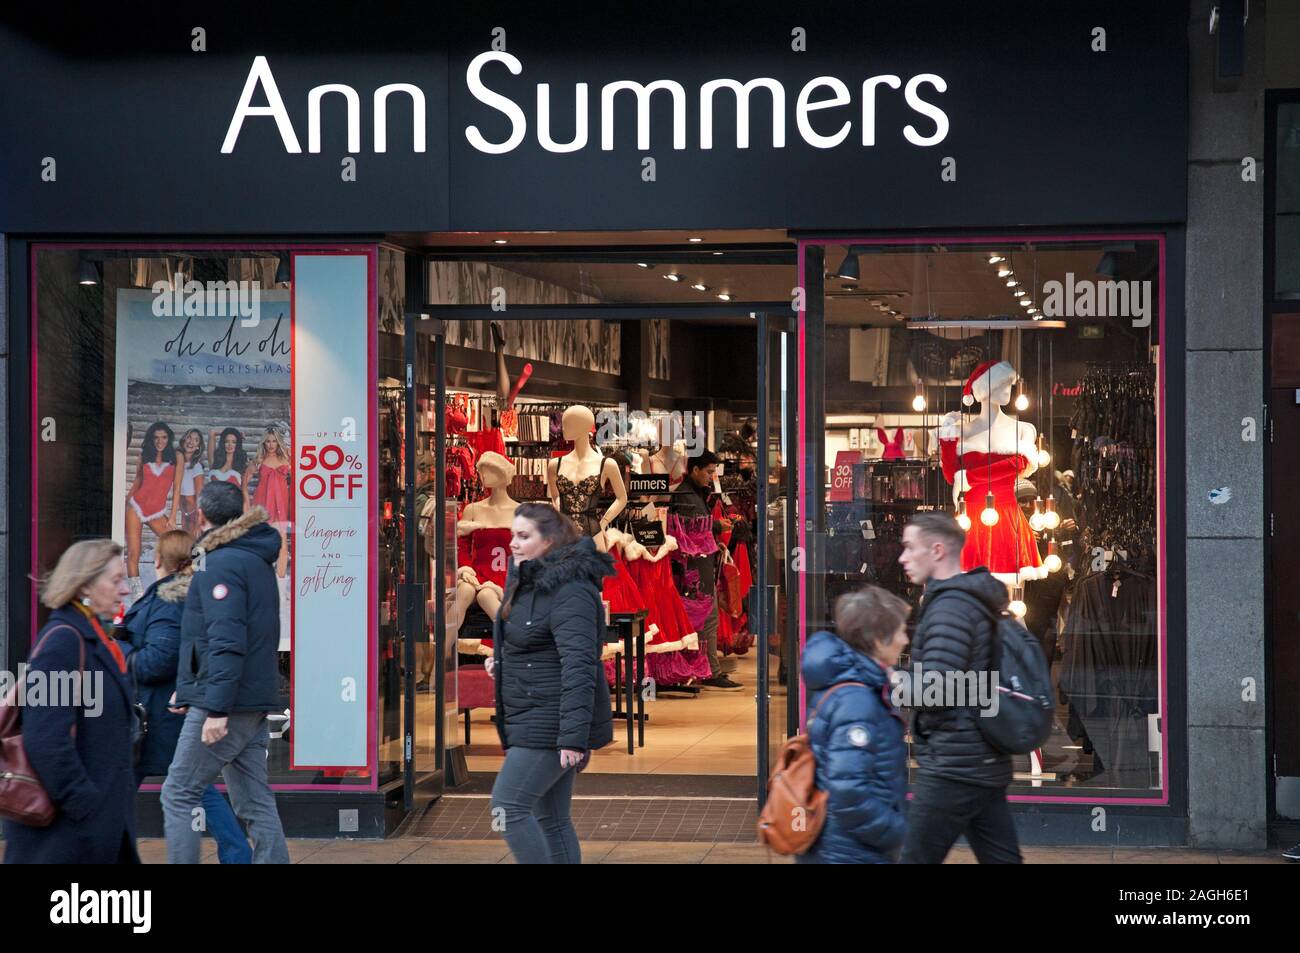 Page 2 - Ann Summers High Resolution Stock Photography and Images - Alamy